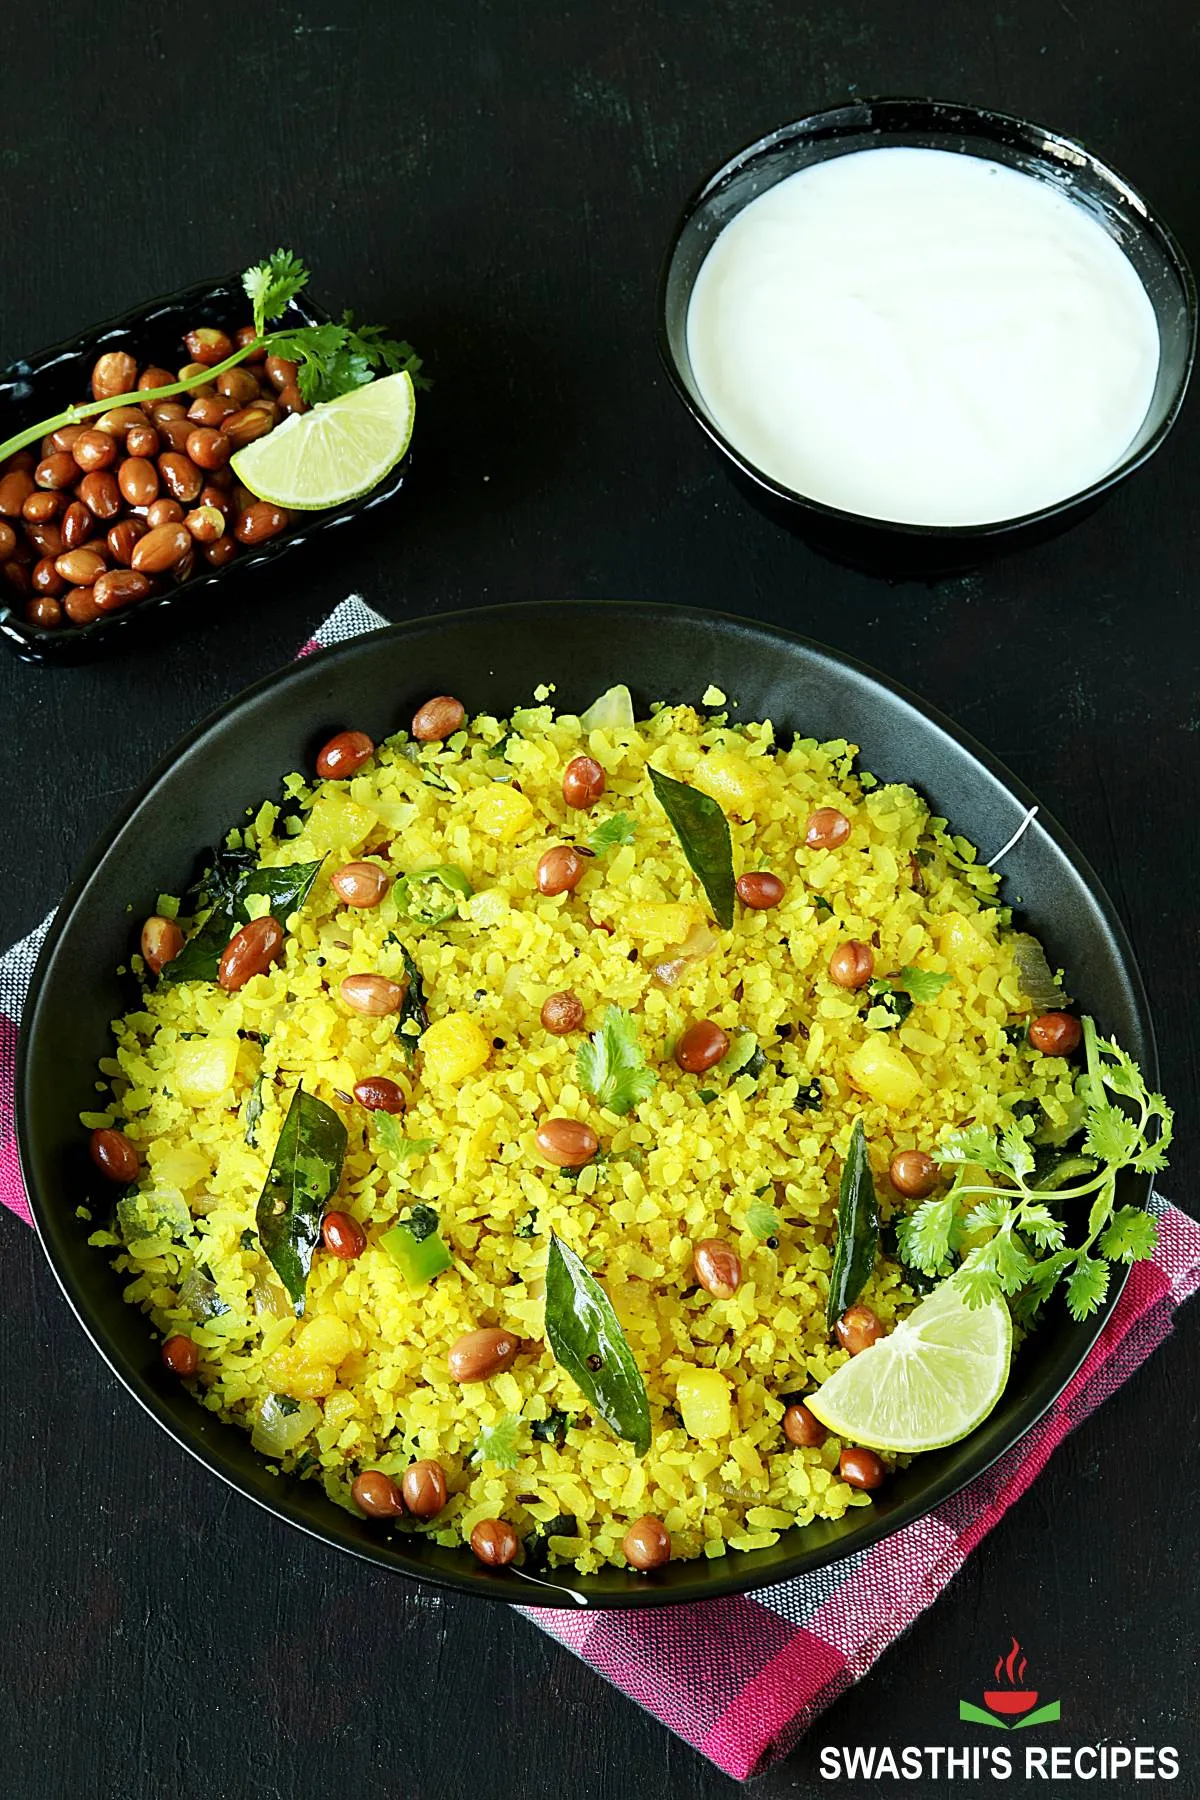 poha recipe made with flattened rice, spices and herbs